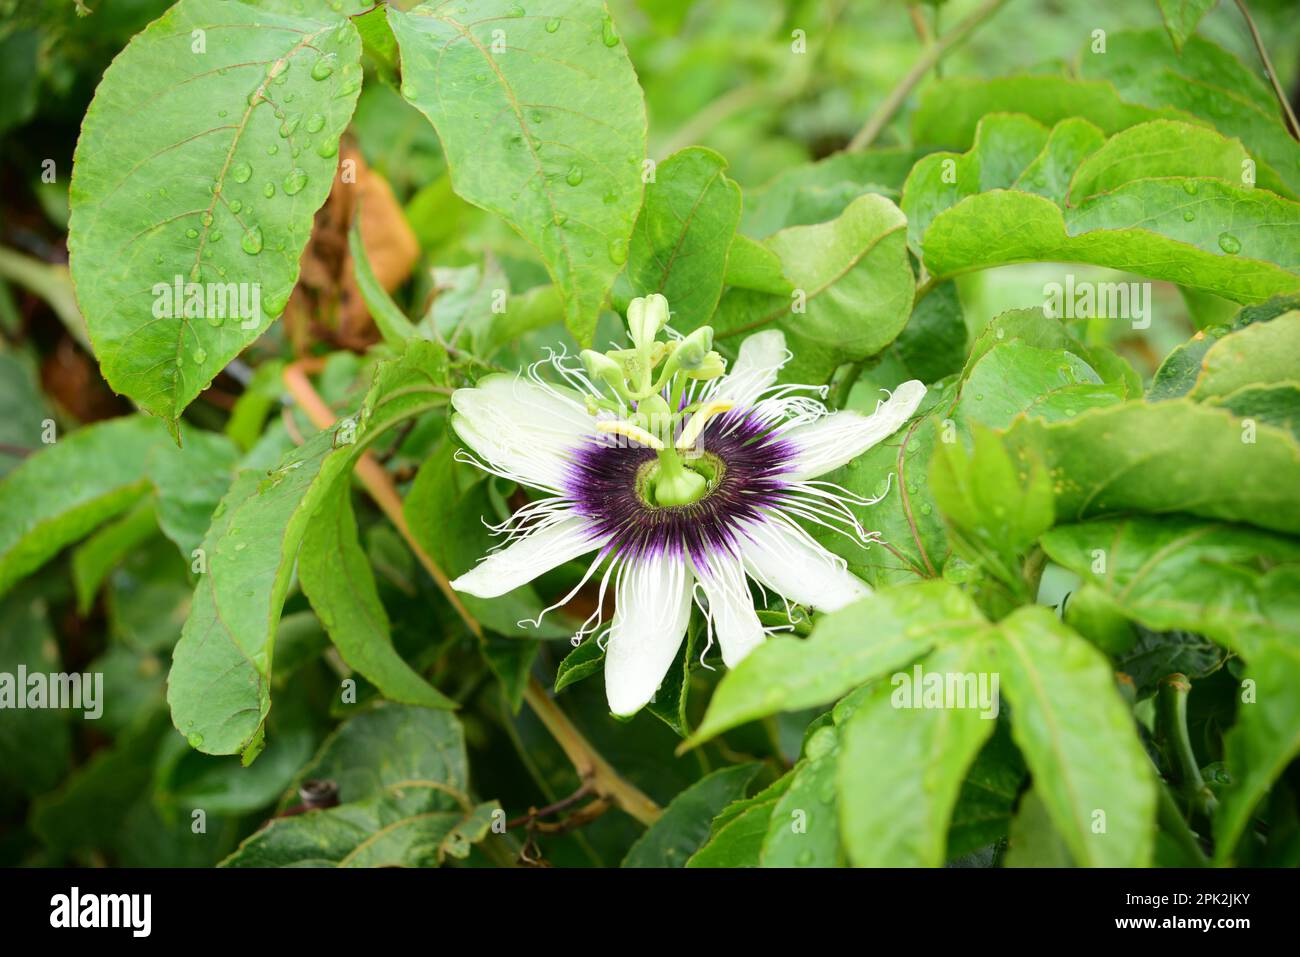 passion fruit purple flower blooming Stock Photo